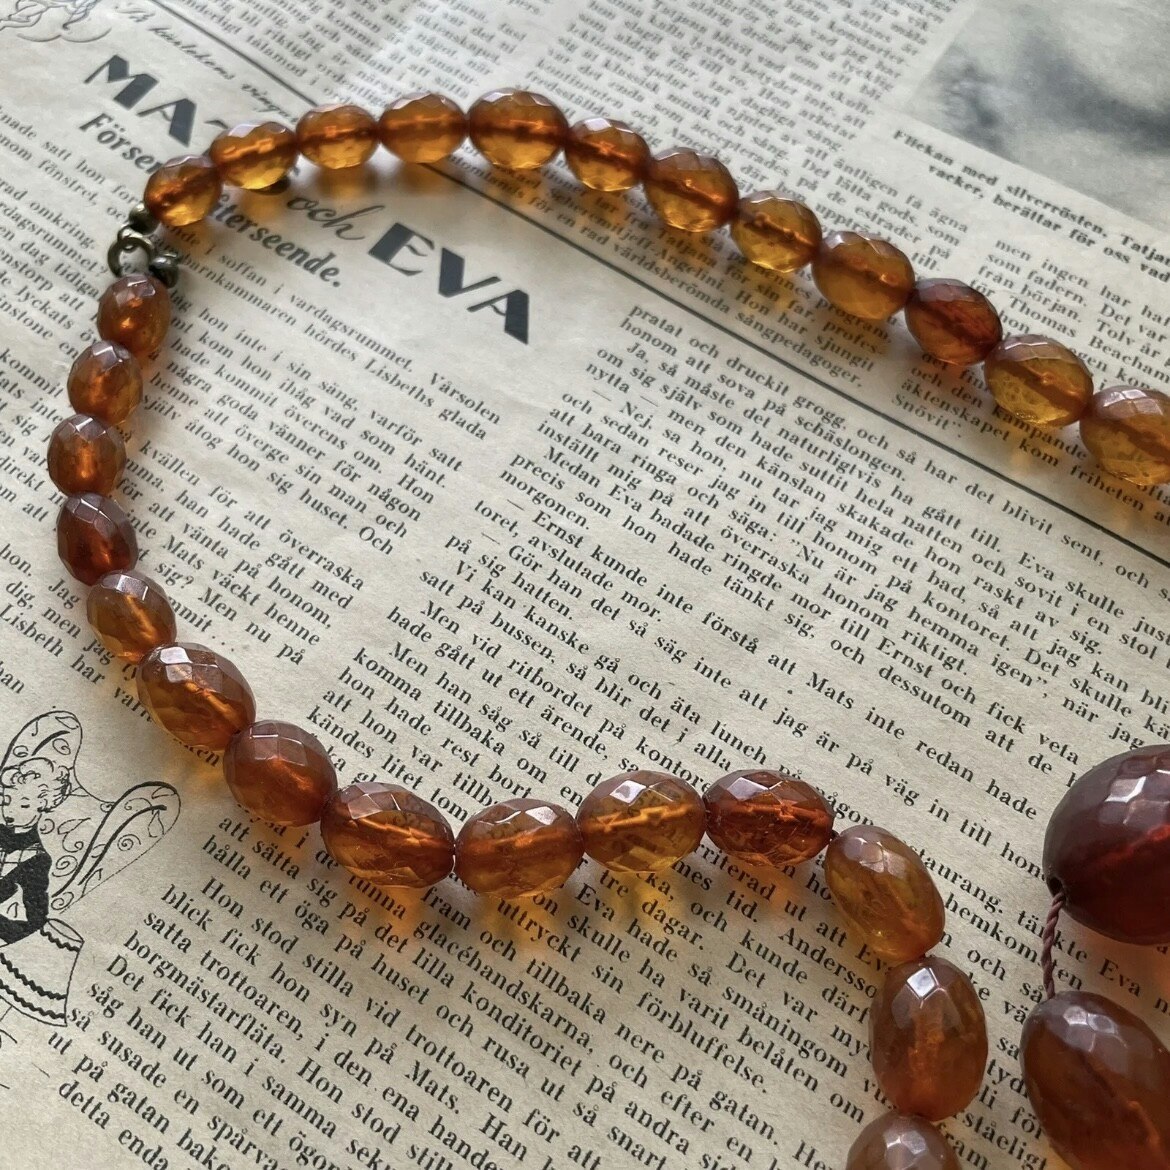 ANTIQUE NATURAL AMBER FACETED BEAD NECKLACE 62g FROM DENMARK 1950's